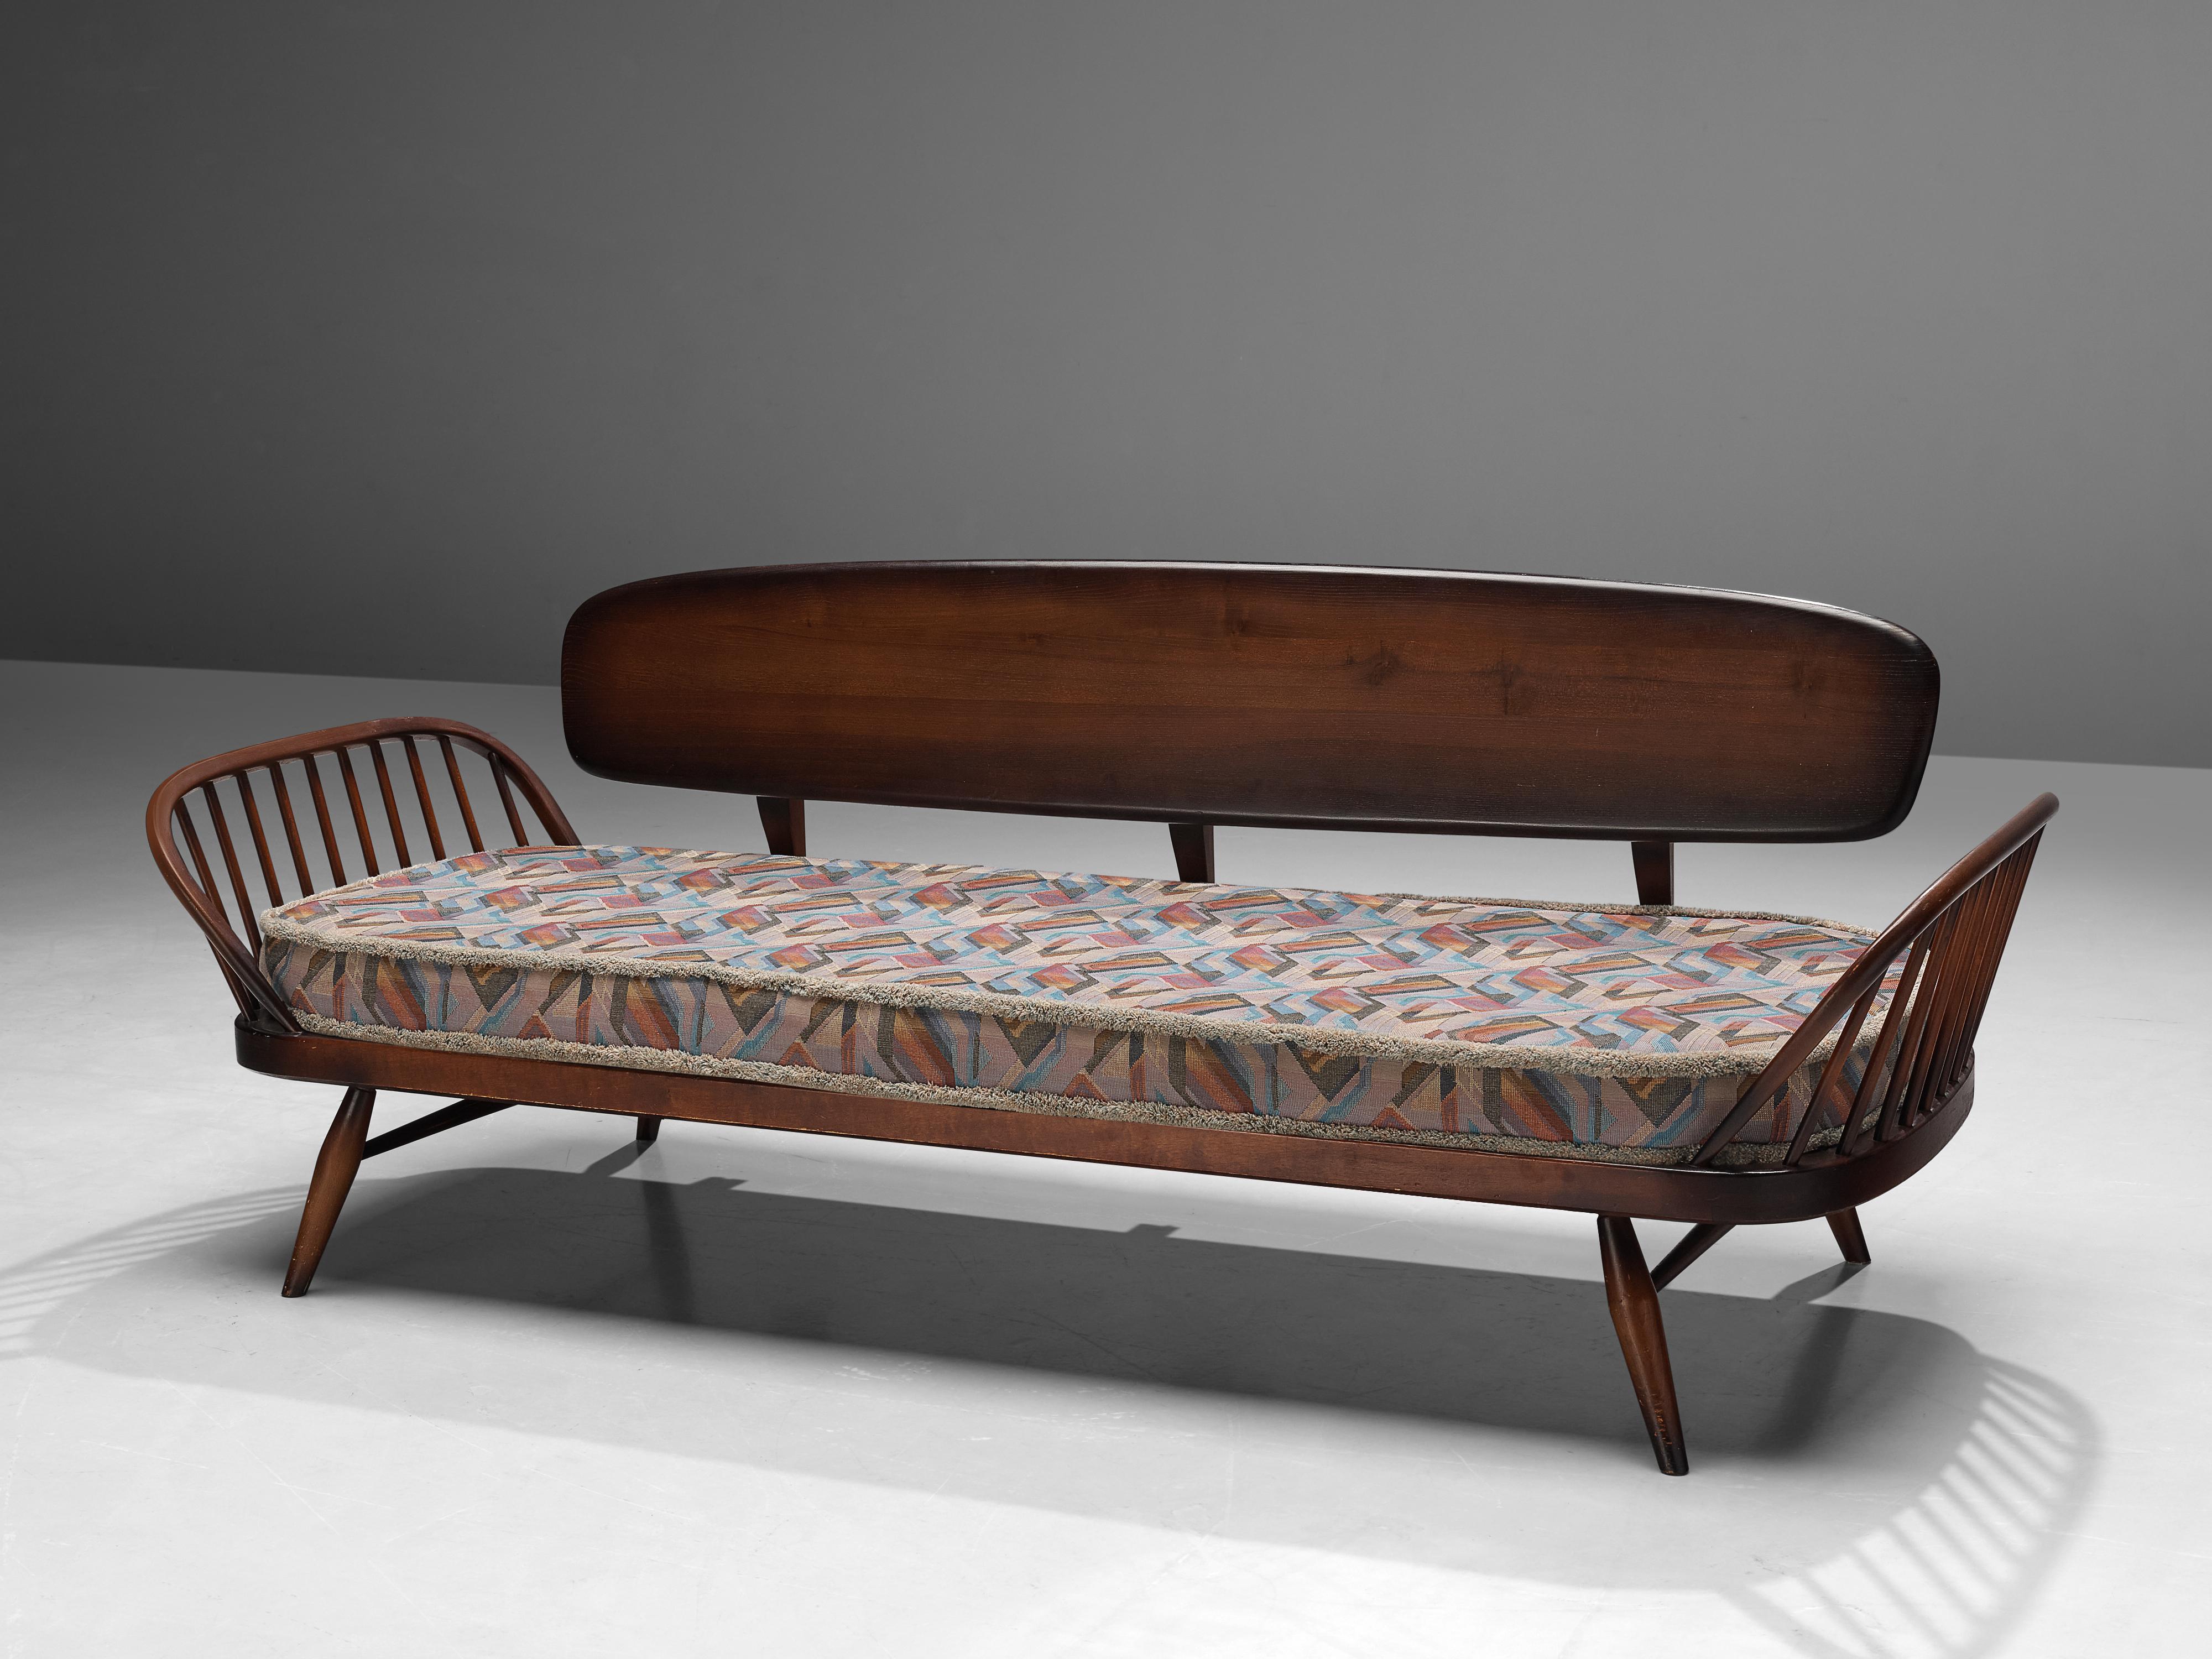 Lucian Ercolani for Ercol, sofa model ‘355’, stained beech, metal, fabric, United Kingdom, 1950s

The ‘studio sofa’, as Ercol describes it, derived from the ‘Originals’ series in the 1950s/1960s. All elements of the ‘Original’ collection were